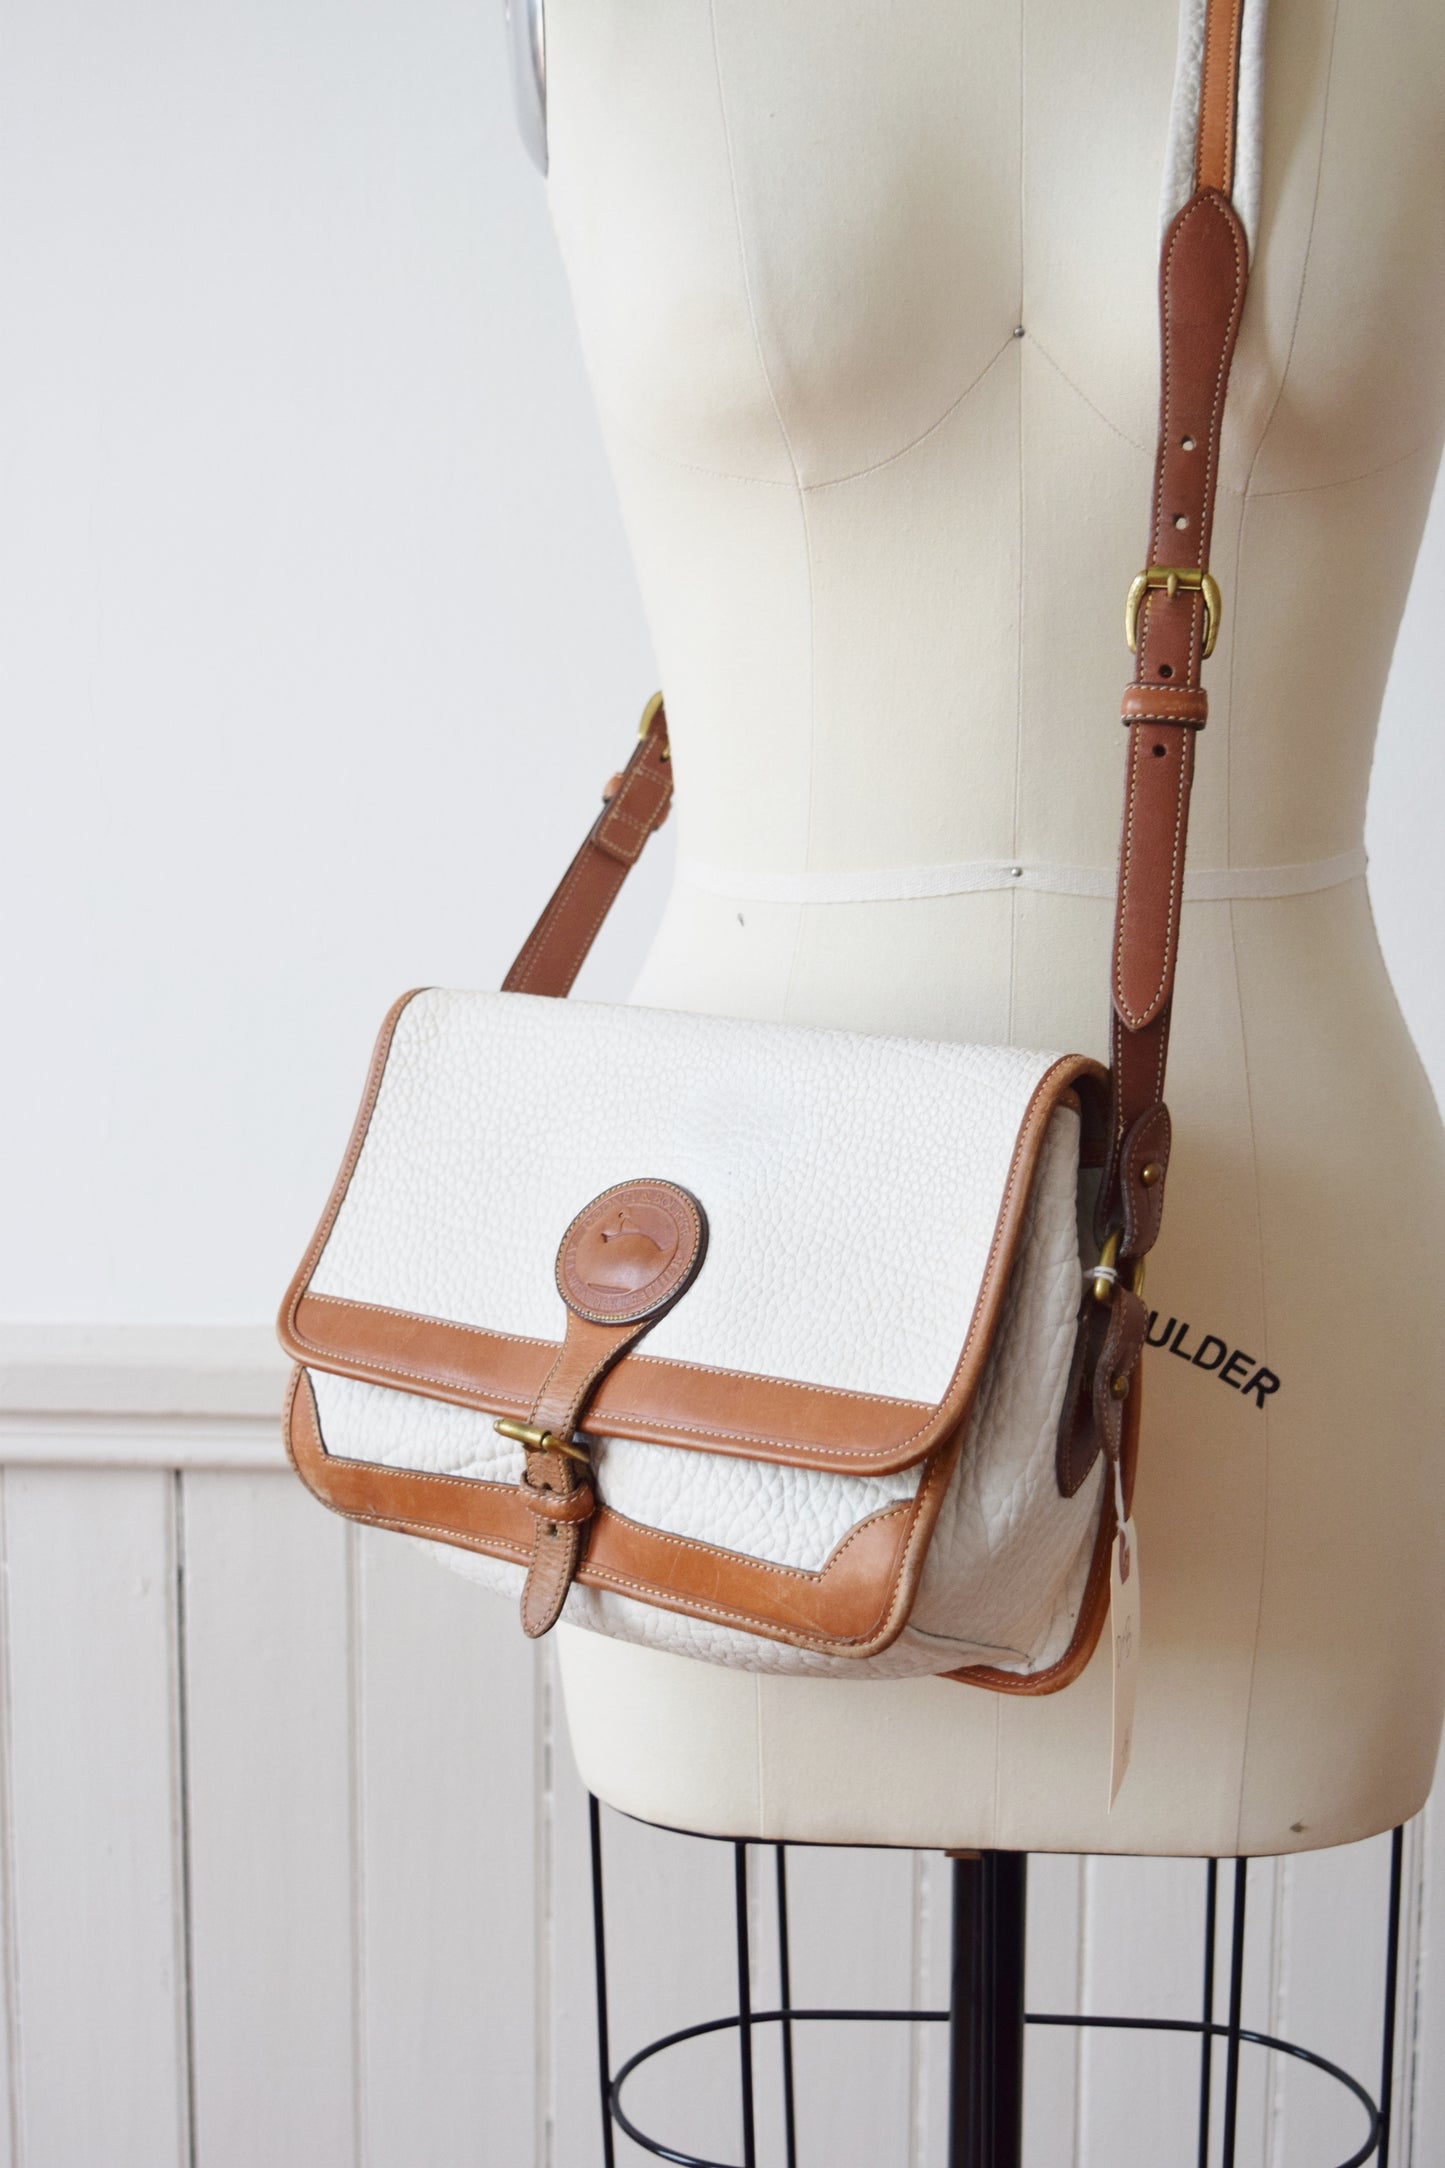 Vintage Dooney & Bourke All Weather Leather Crossbody Bag / Purse in White and British Tan